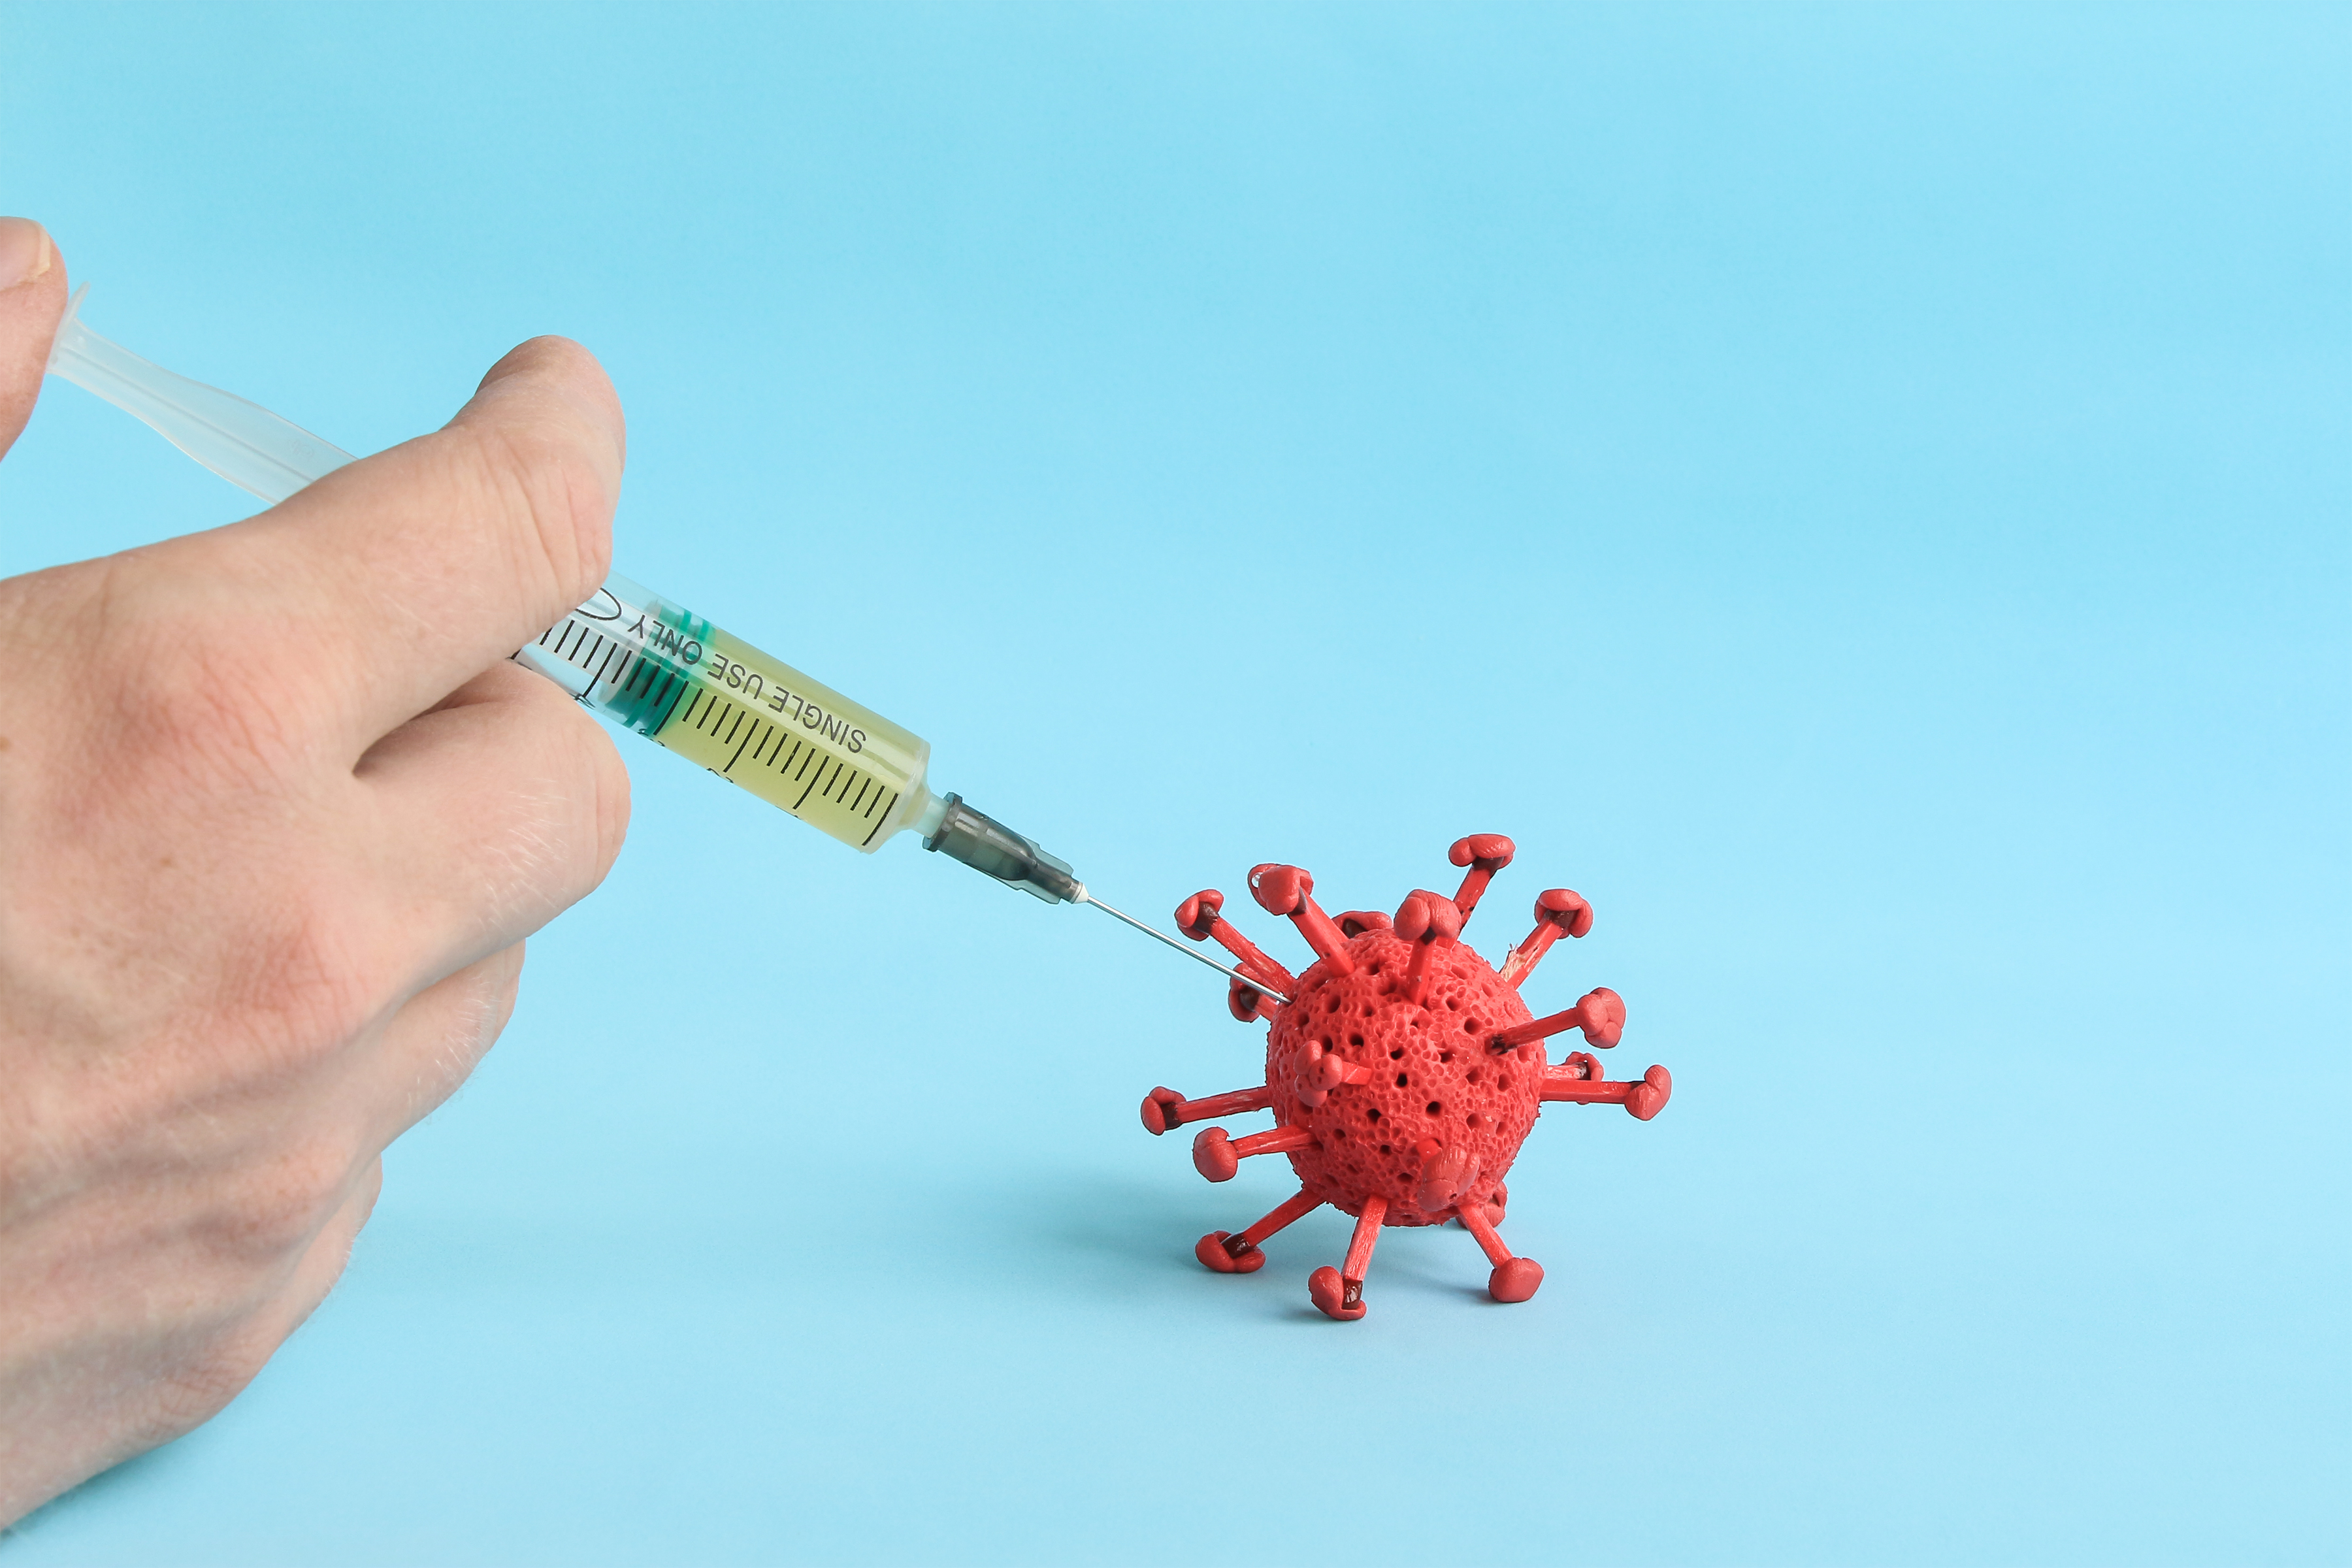 Biotechnology company Moderna is preparing to begin human trials on HIV vaccines as early as Wednesday, using the same mRNA platform as the firm's COV